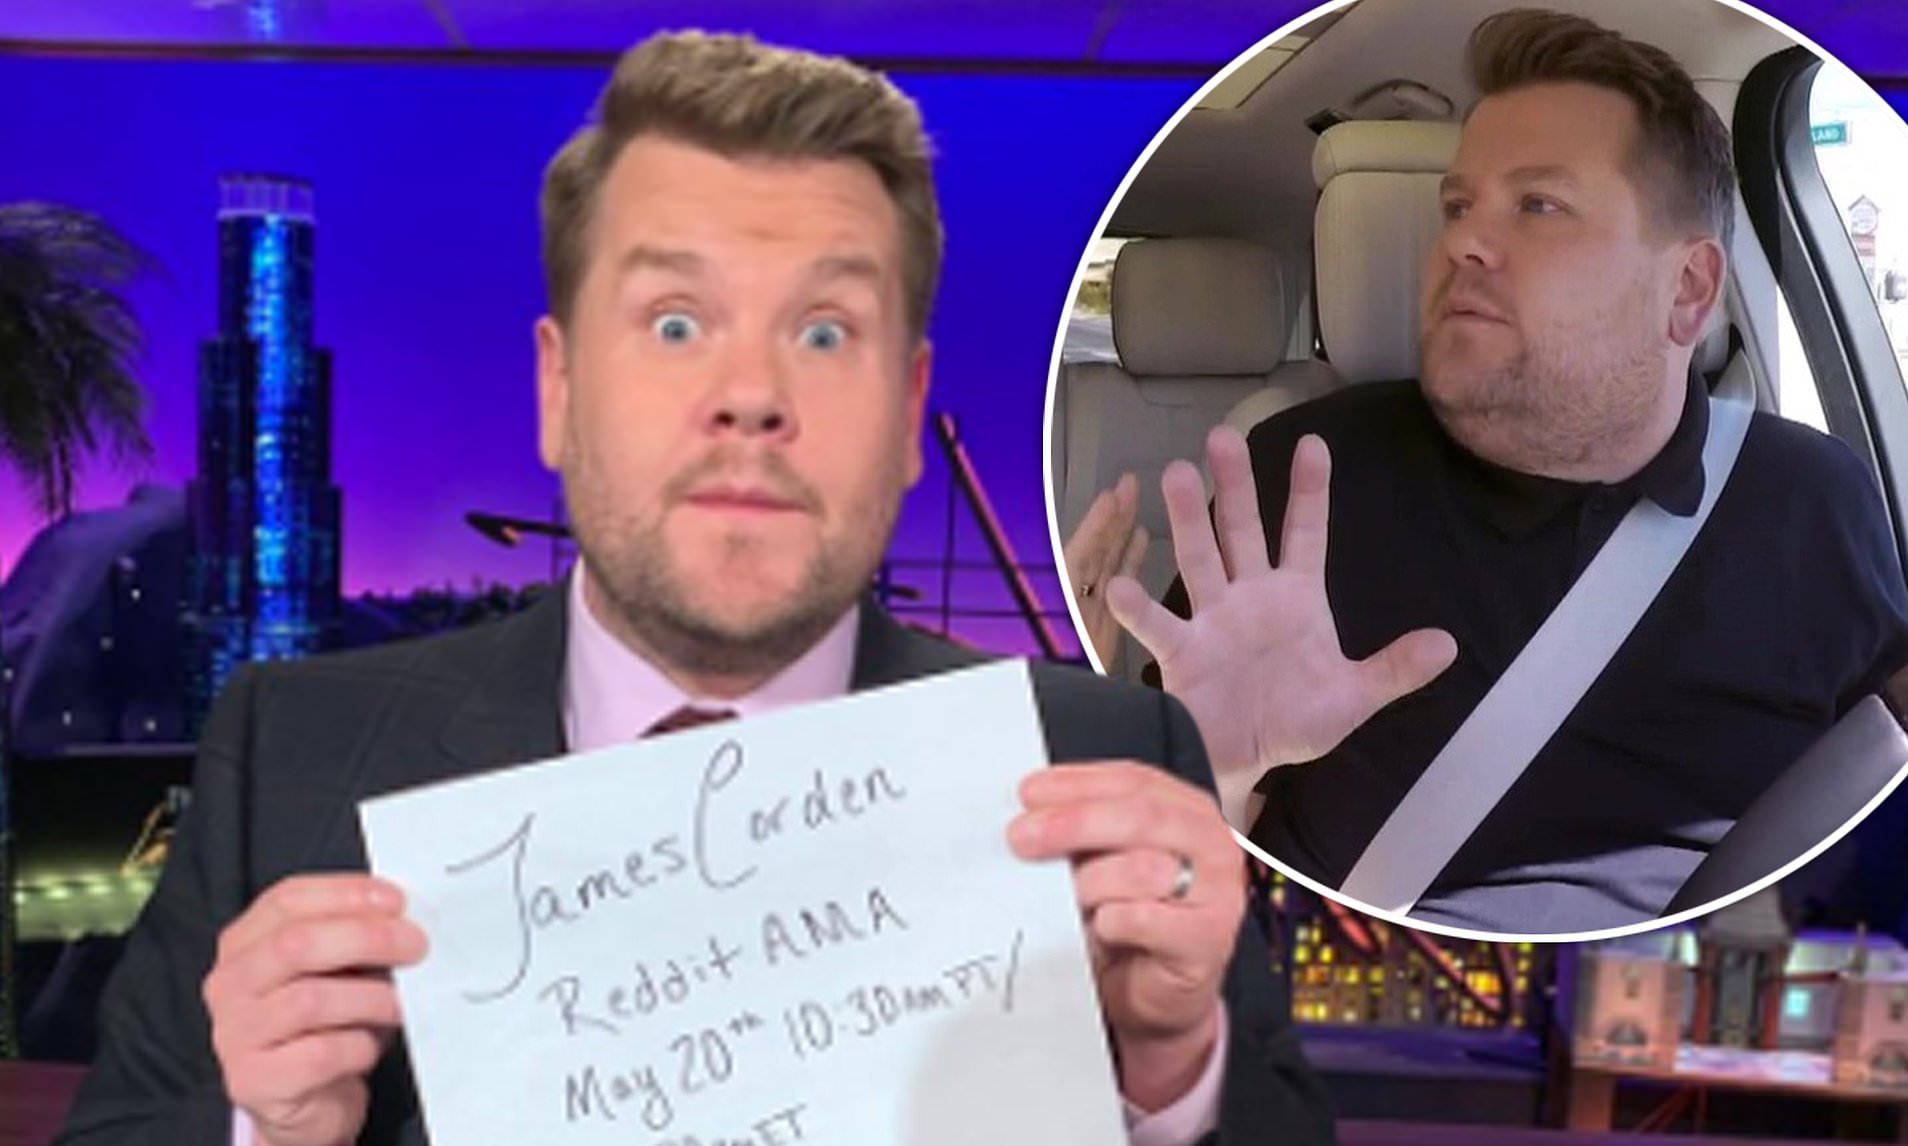 James Corden AMA - A Look At The Life And Career Of The British Comedian